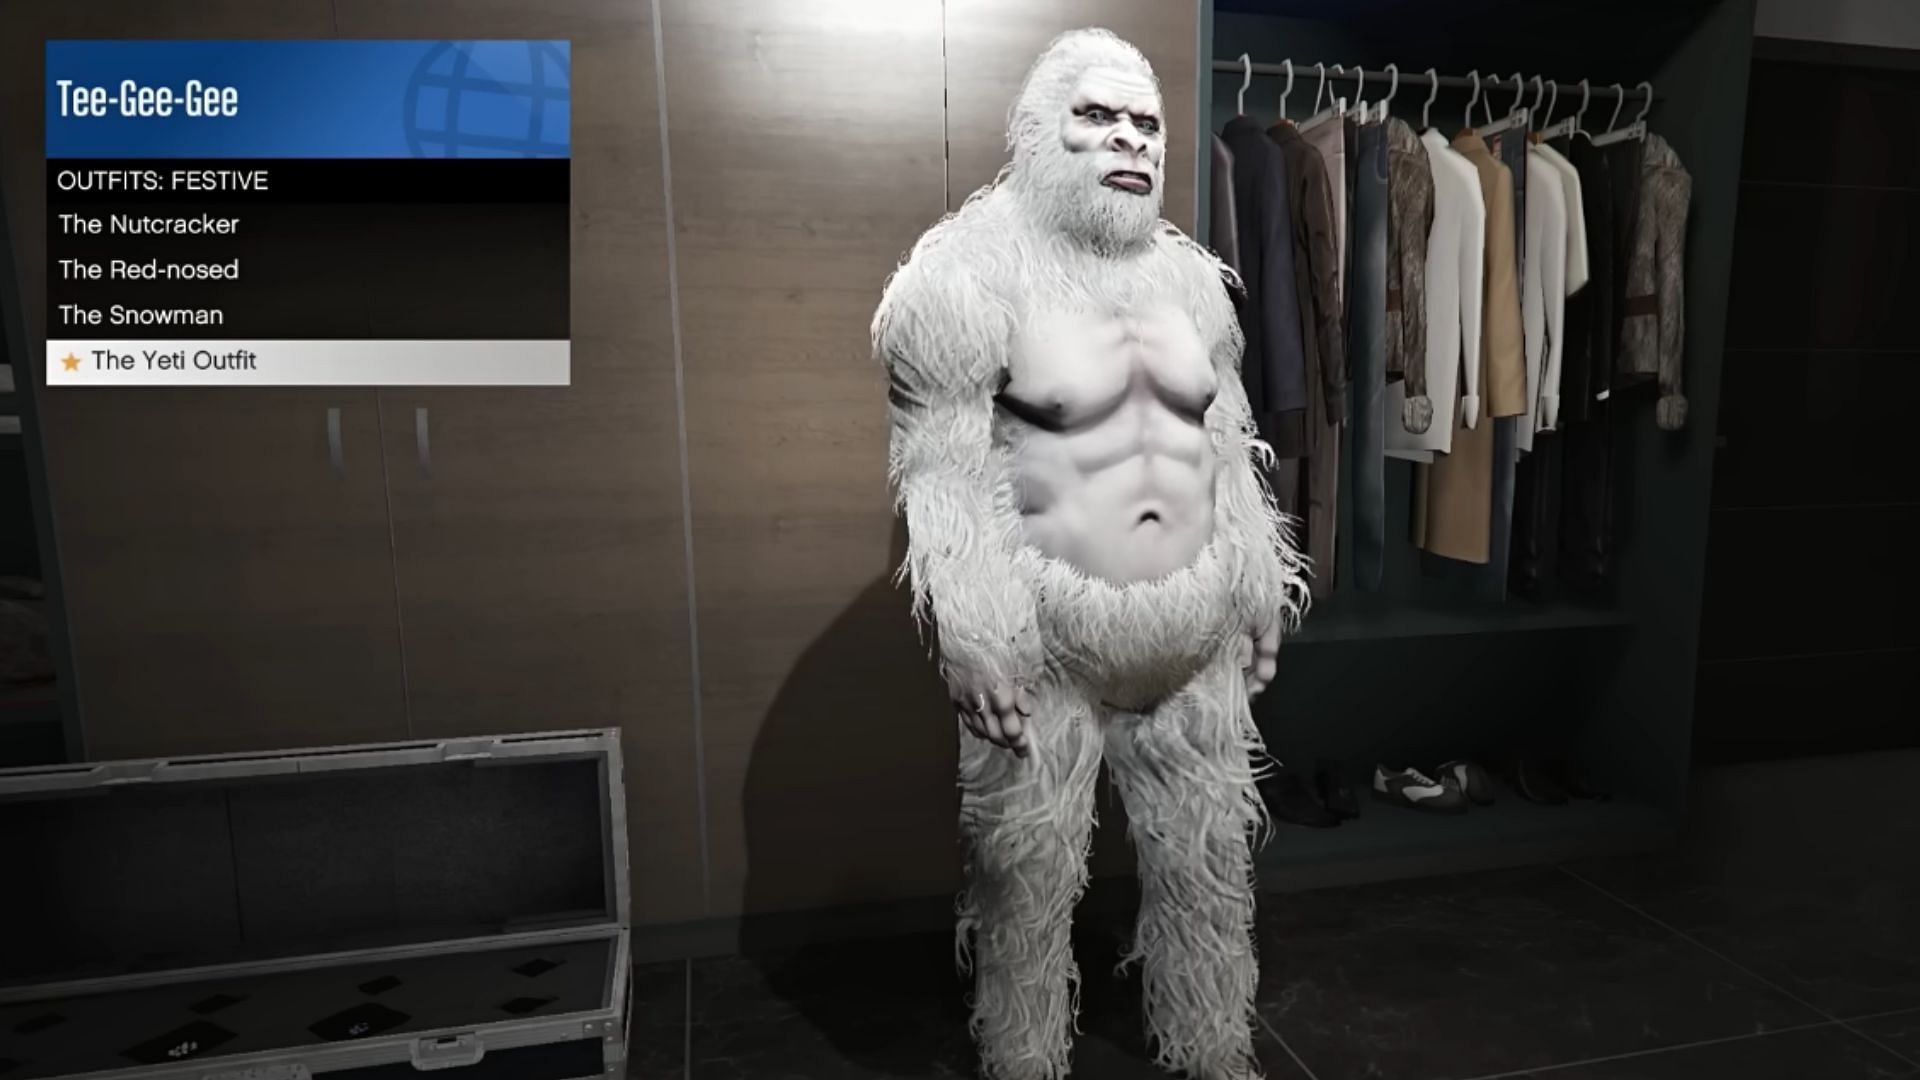 This is what the Yeti outfit looks like (Image via YouTube/TGG)